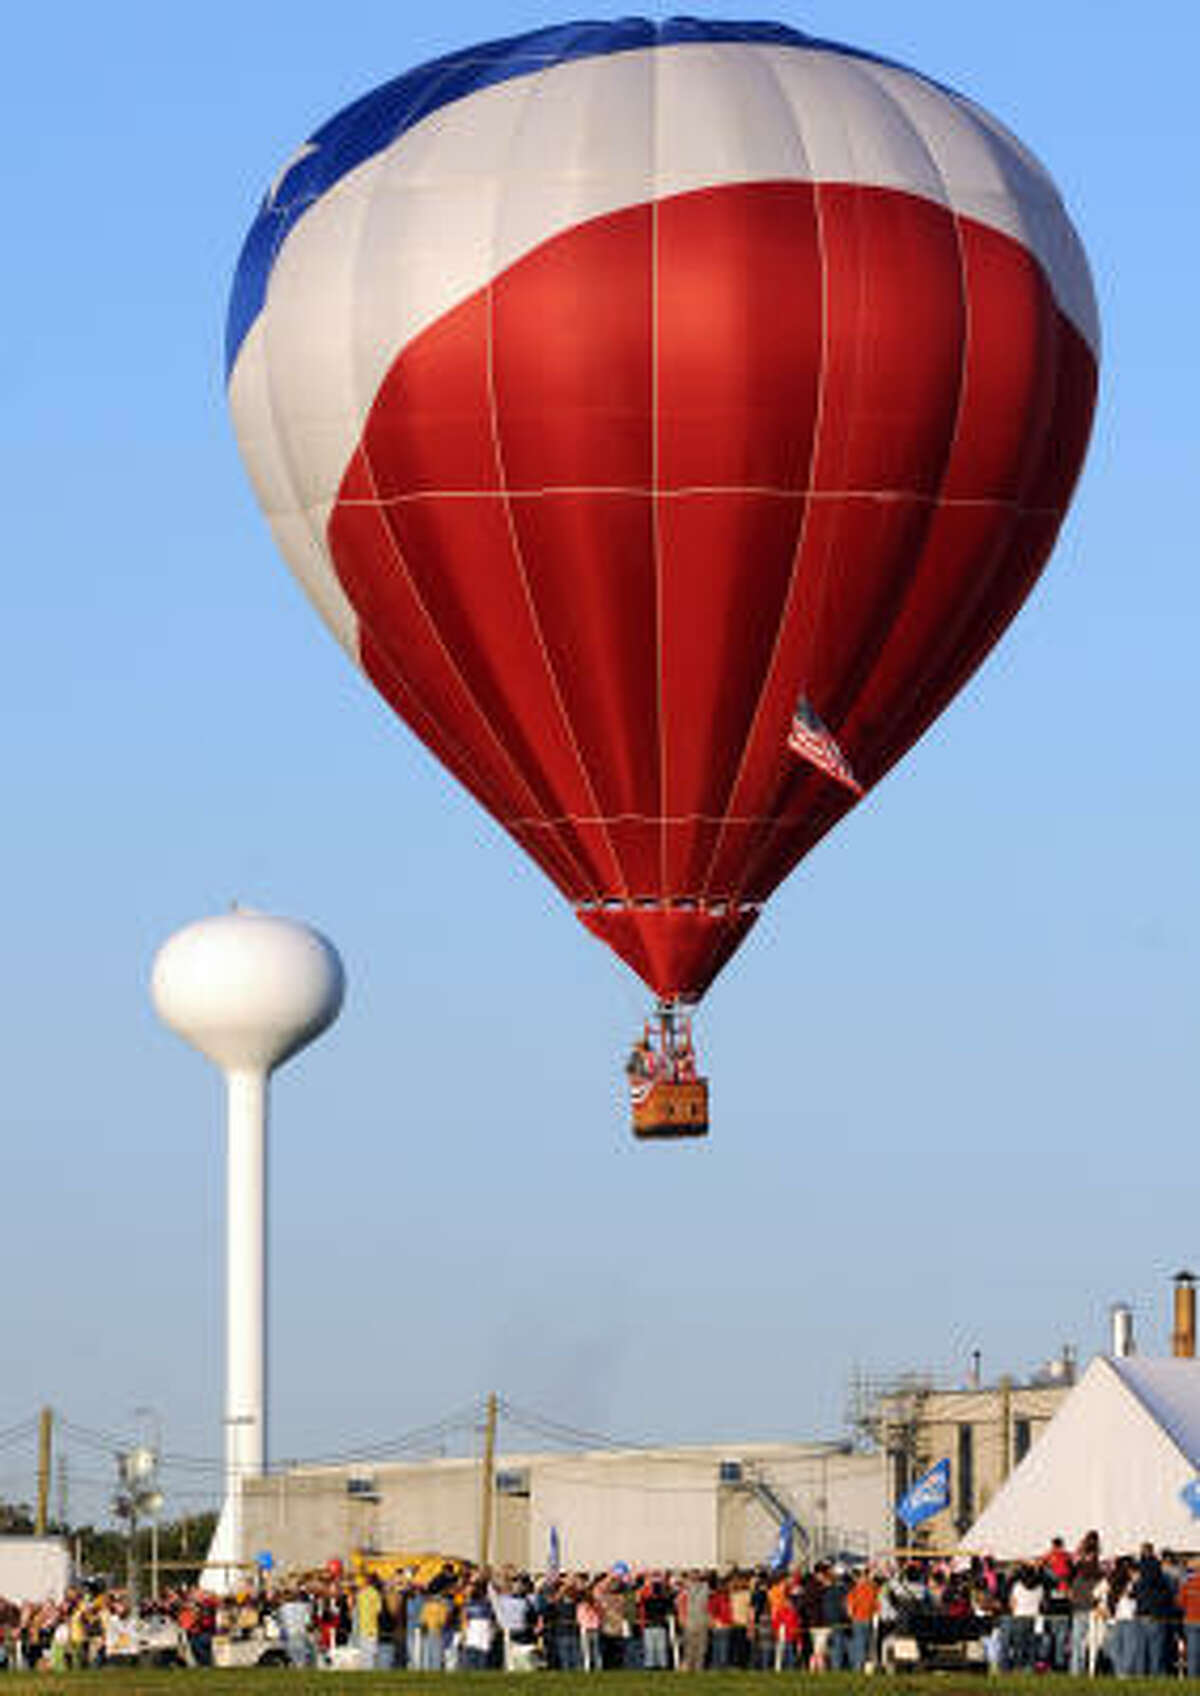 Hot air balloons take off over Johnson Space Center.